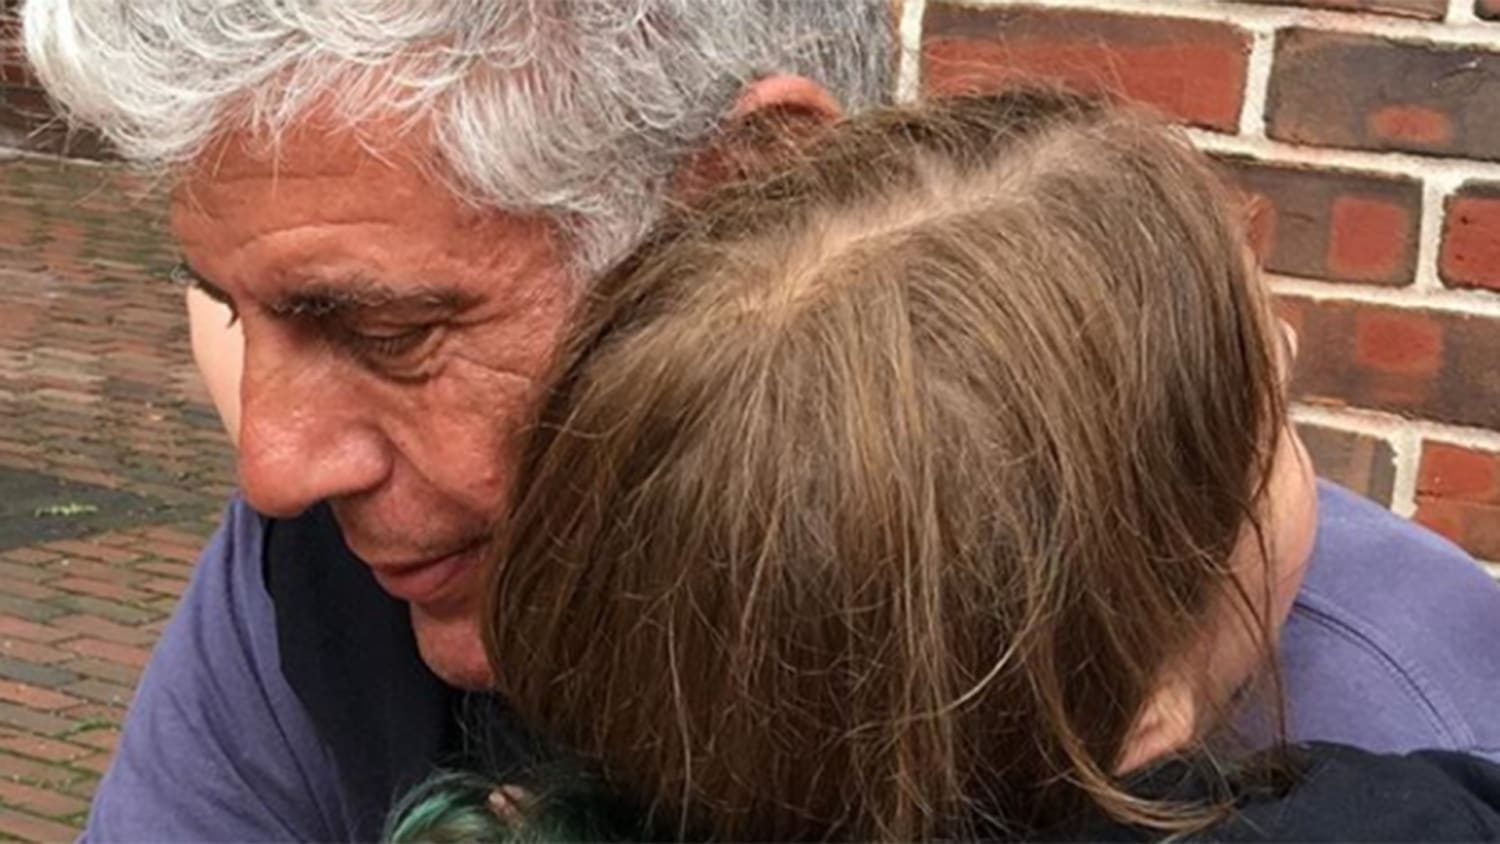 Anthony Bourdain spoke lovingly of daughter in one of his final